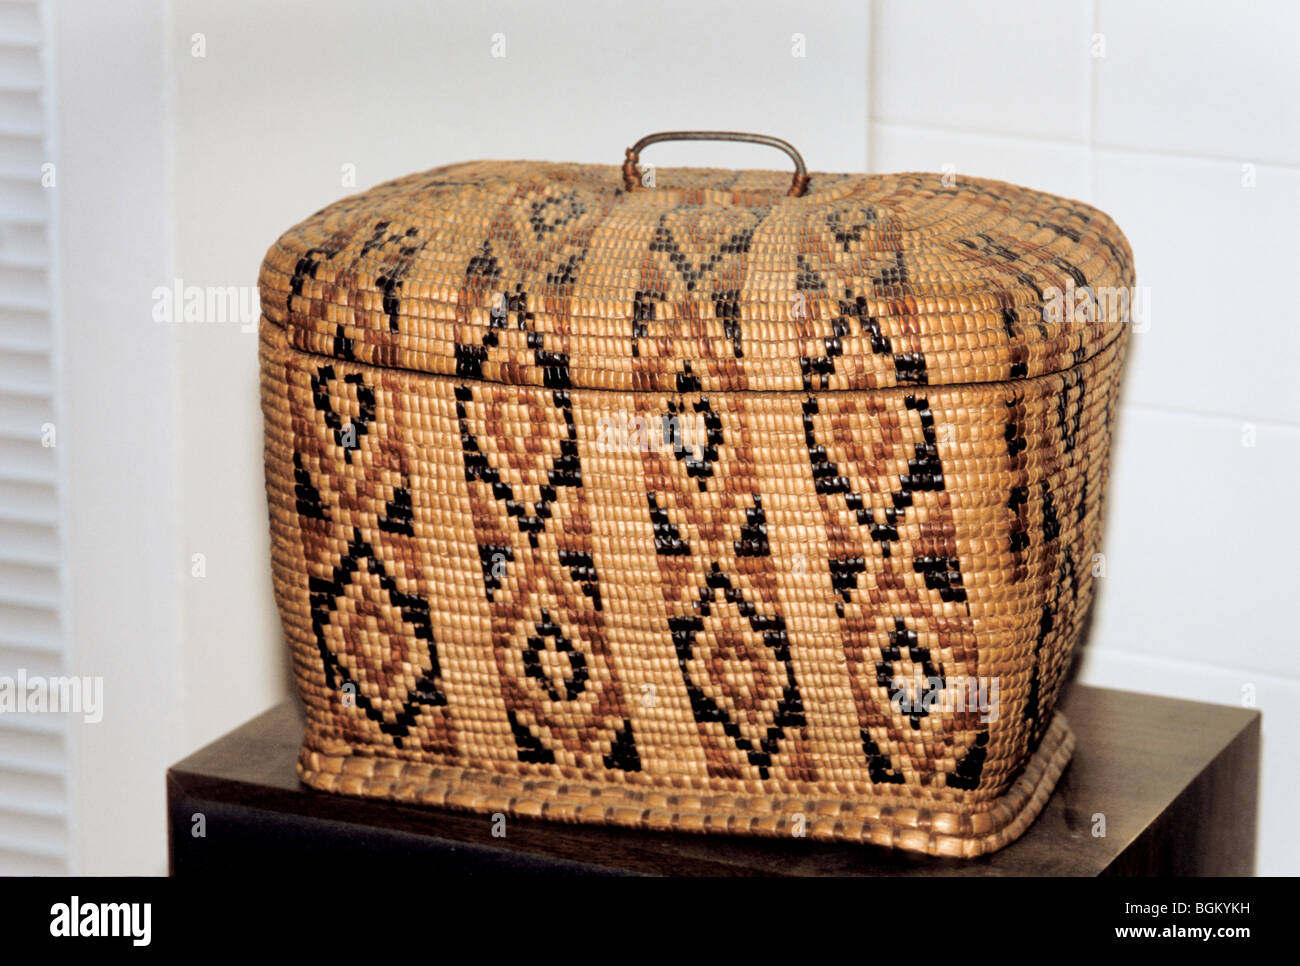 Artistic patterns woven into a cedar storage and gathering basket with lid made by the Suquamish Indian tribe, Northwest Pacific Coast, Washington Stock Photo